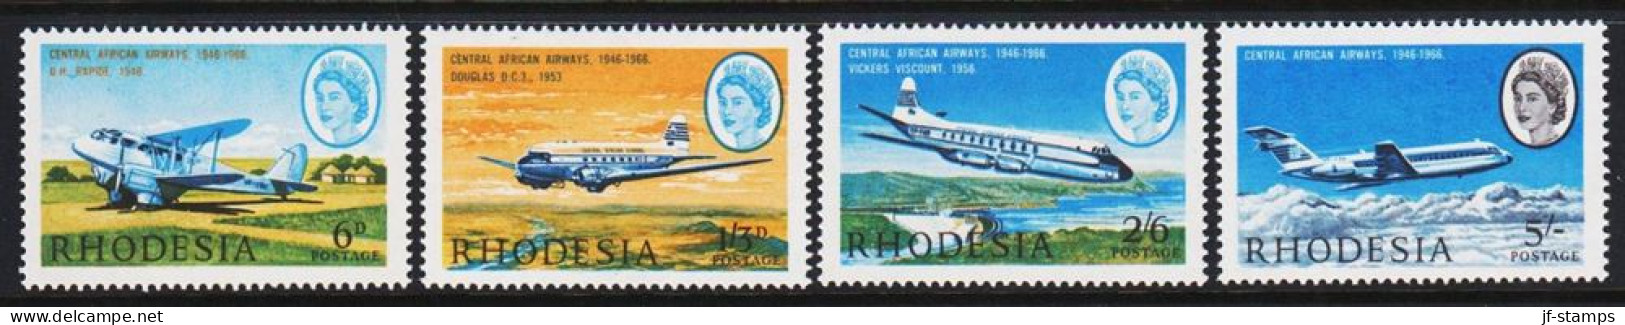 1966. RHODESIA. CENTRAL AFRICAN AIRWAYS. Complete Set With 4 Stamps Never Hinged.  (Michel 42-45) - JF545283 - Rodesia (1964-1980)